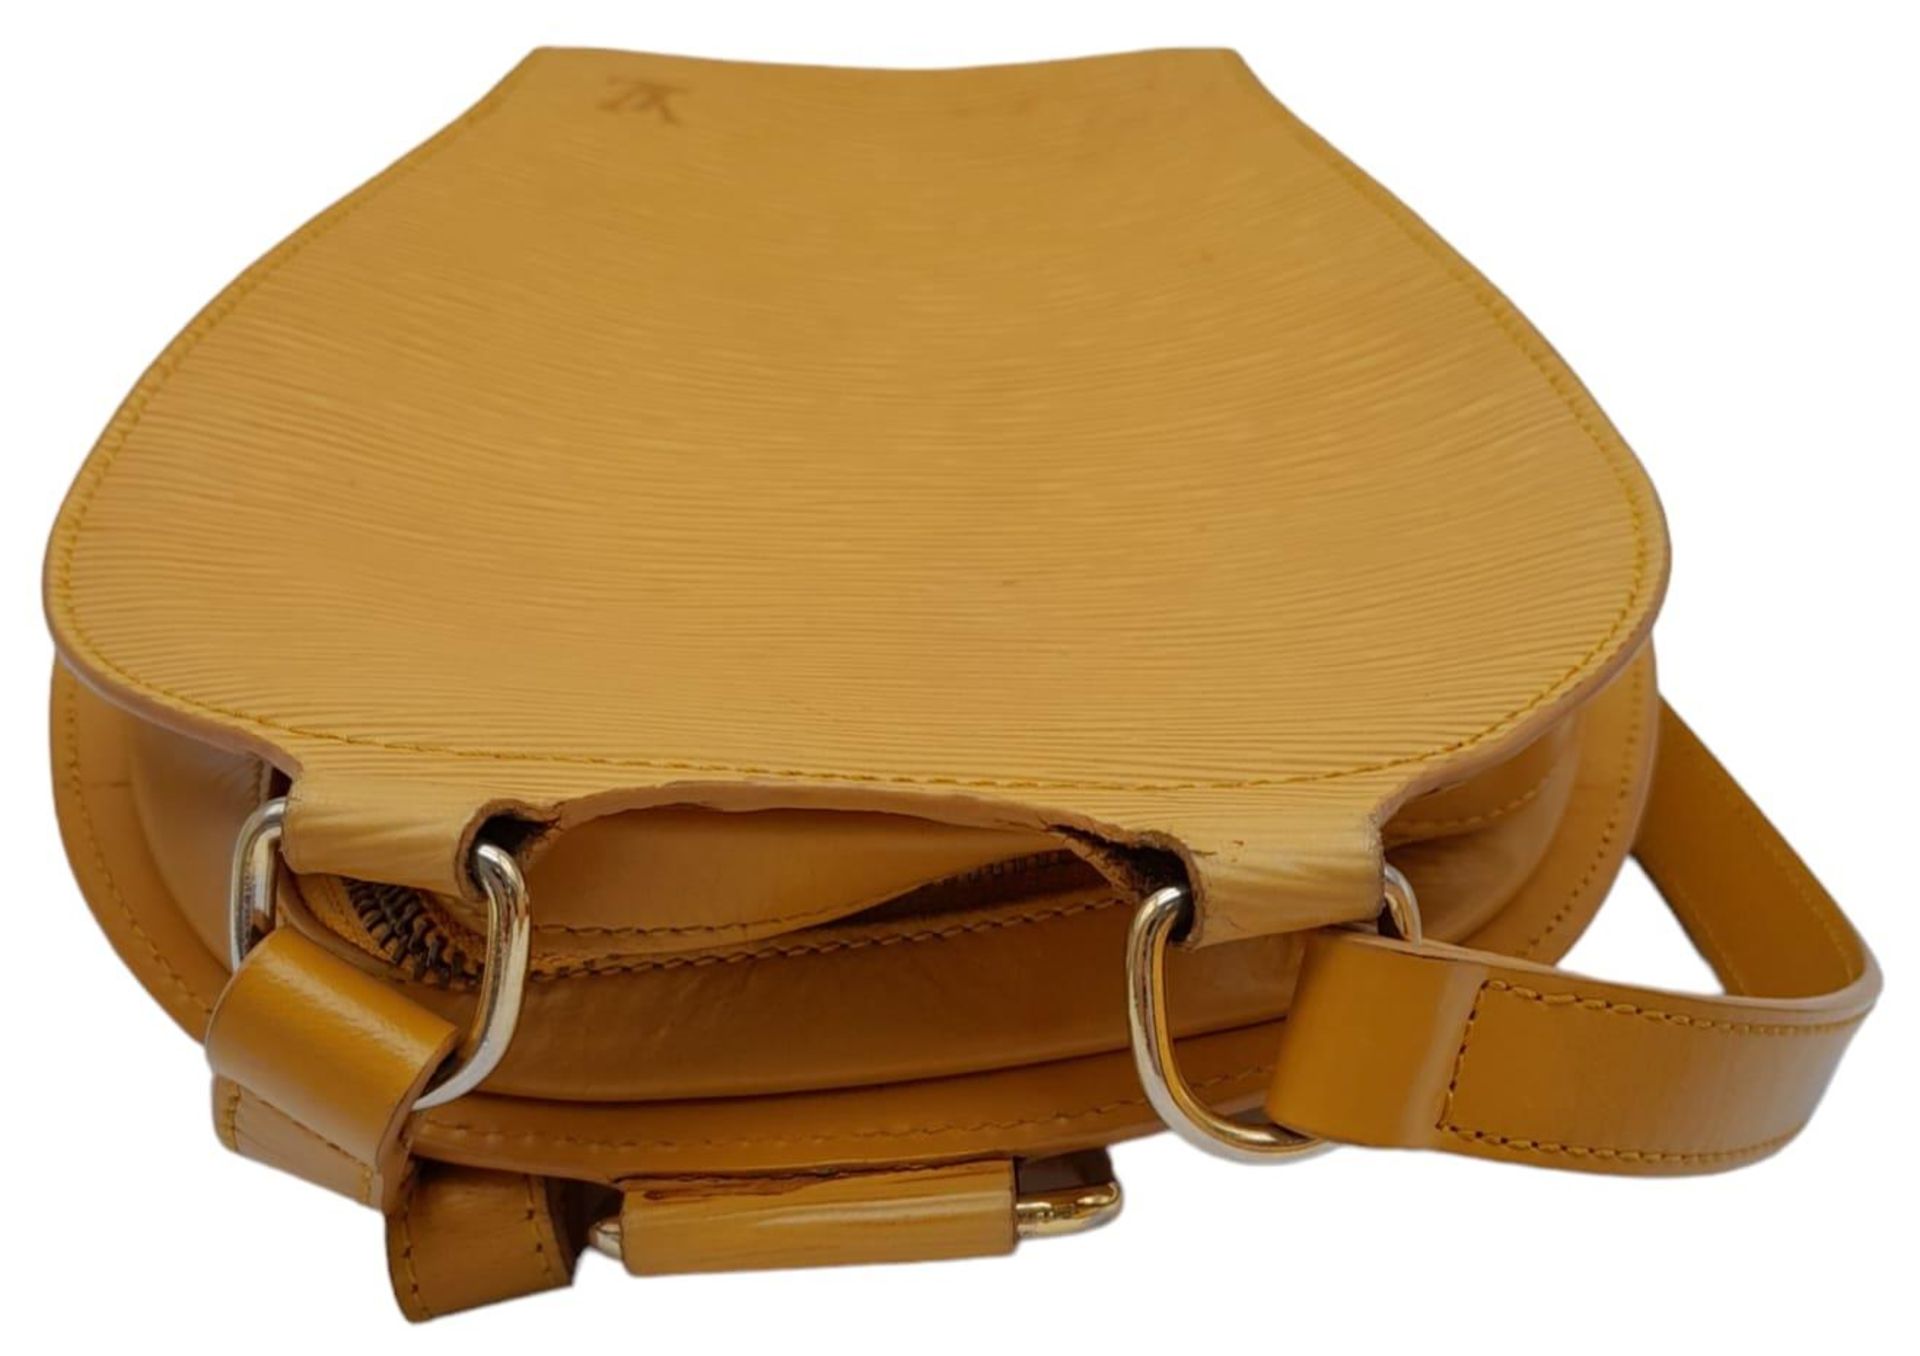 A Louis Vuitton Yellow 'Mabillon' Backpack. Epi leather exterior with gold-toned hardware, the - Bild 4 aus 9